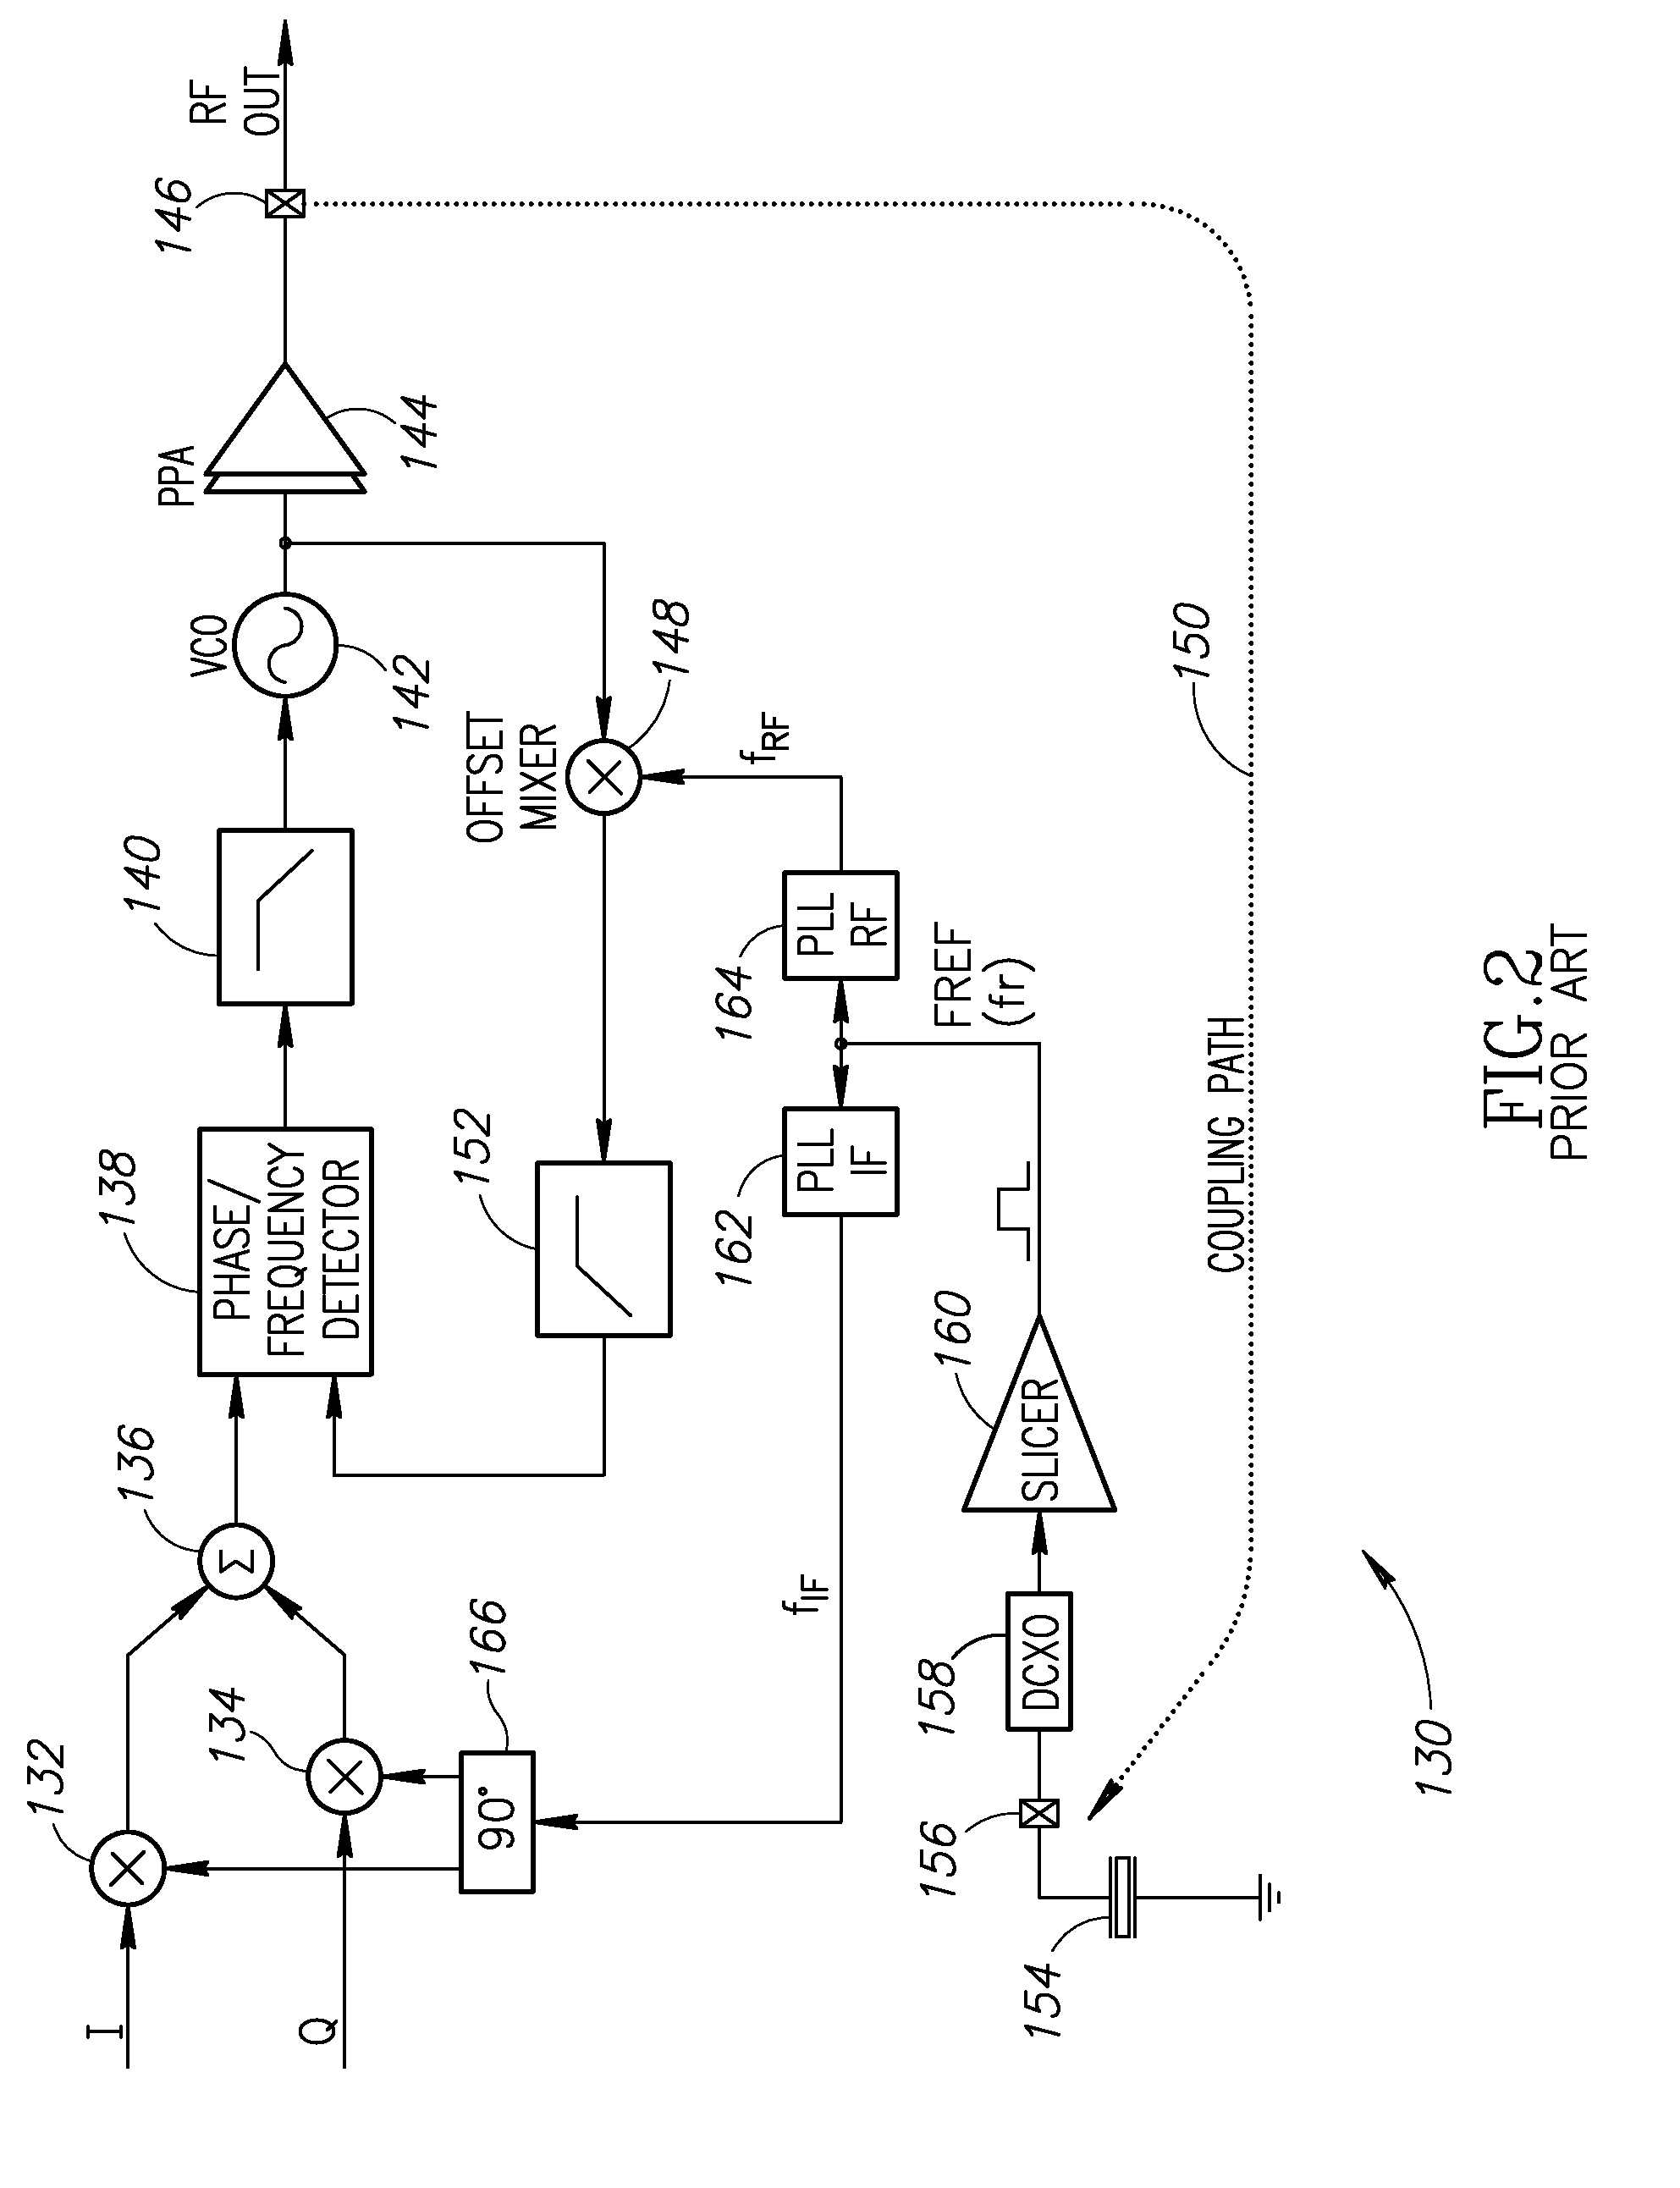 Phase alignment mechanism for minimizing the impact of integer-channel interference in a phase locked loop